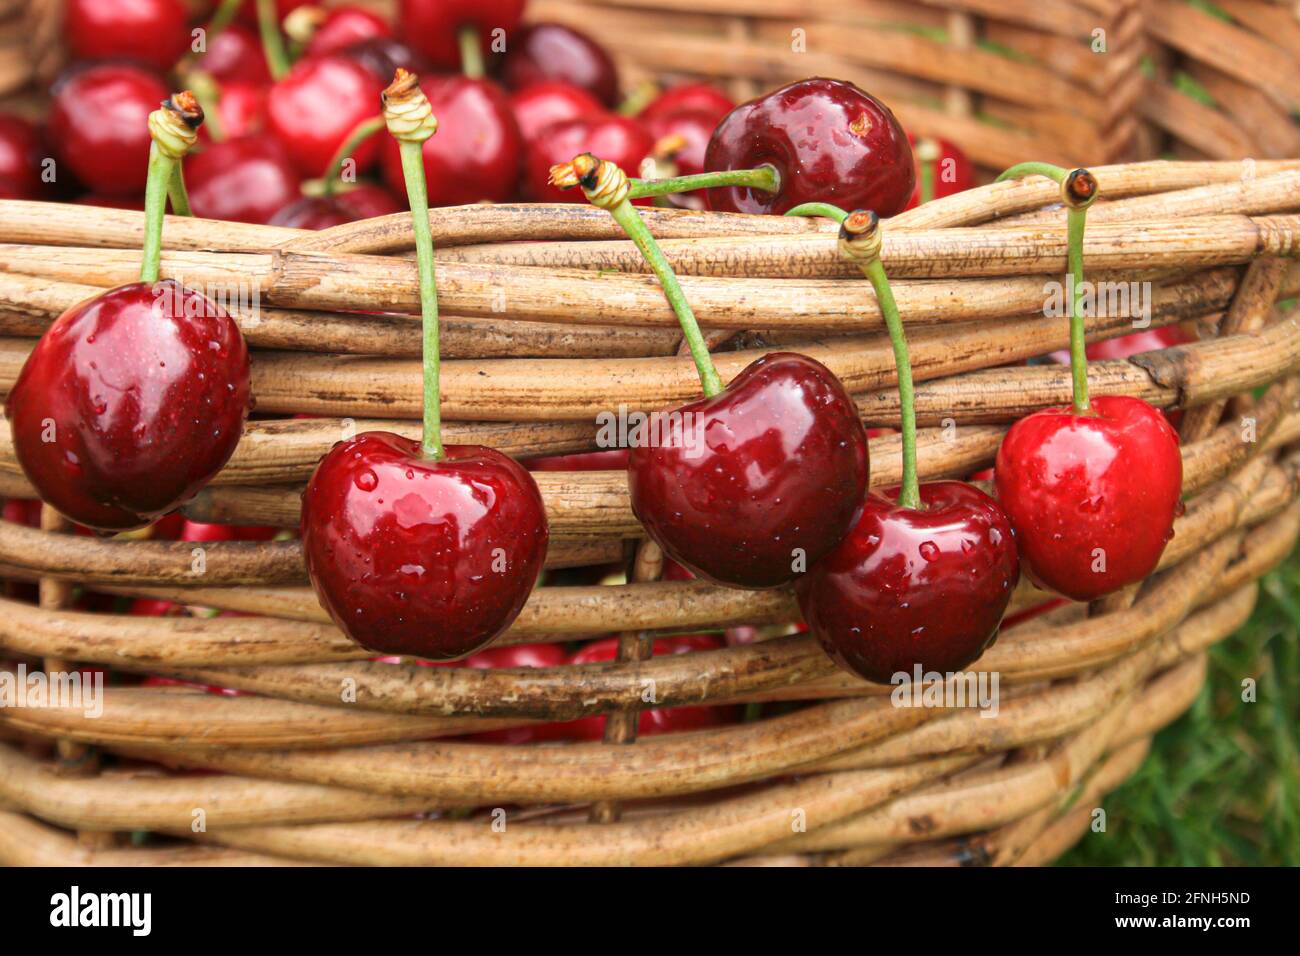 Cherries hanging from the edge of a basket Stock Photo